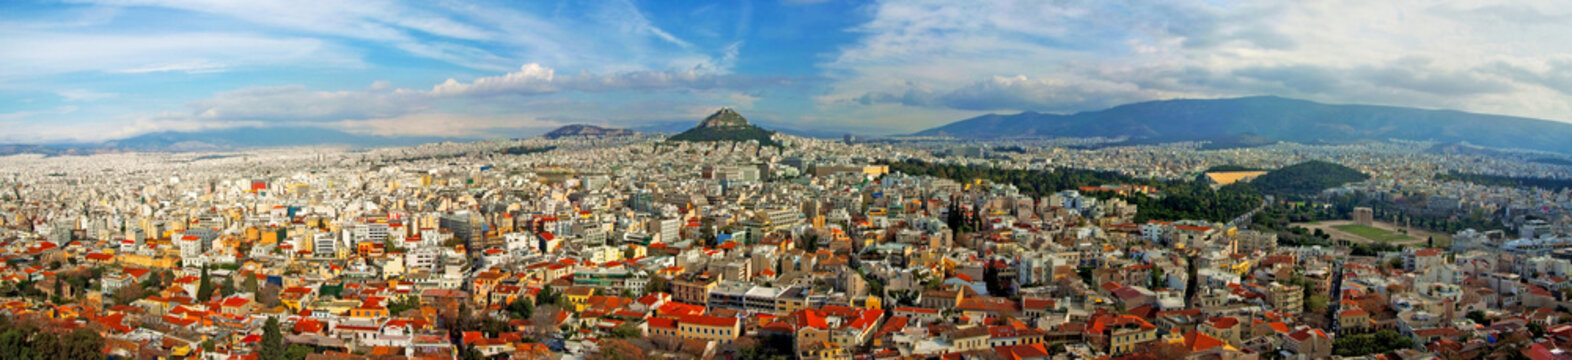 Aerial view of Athen with Lycabettus Hill